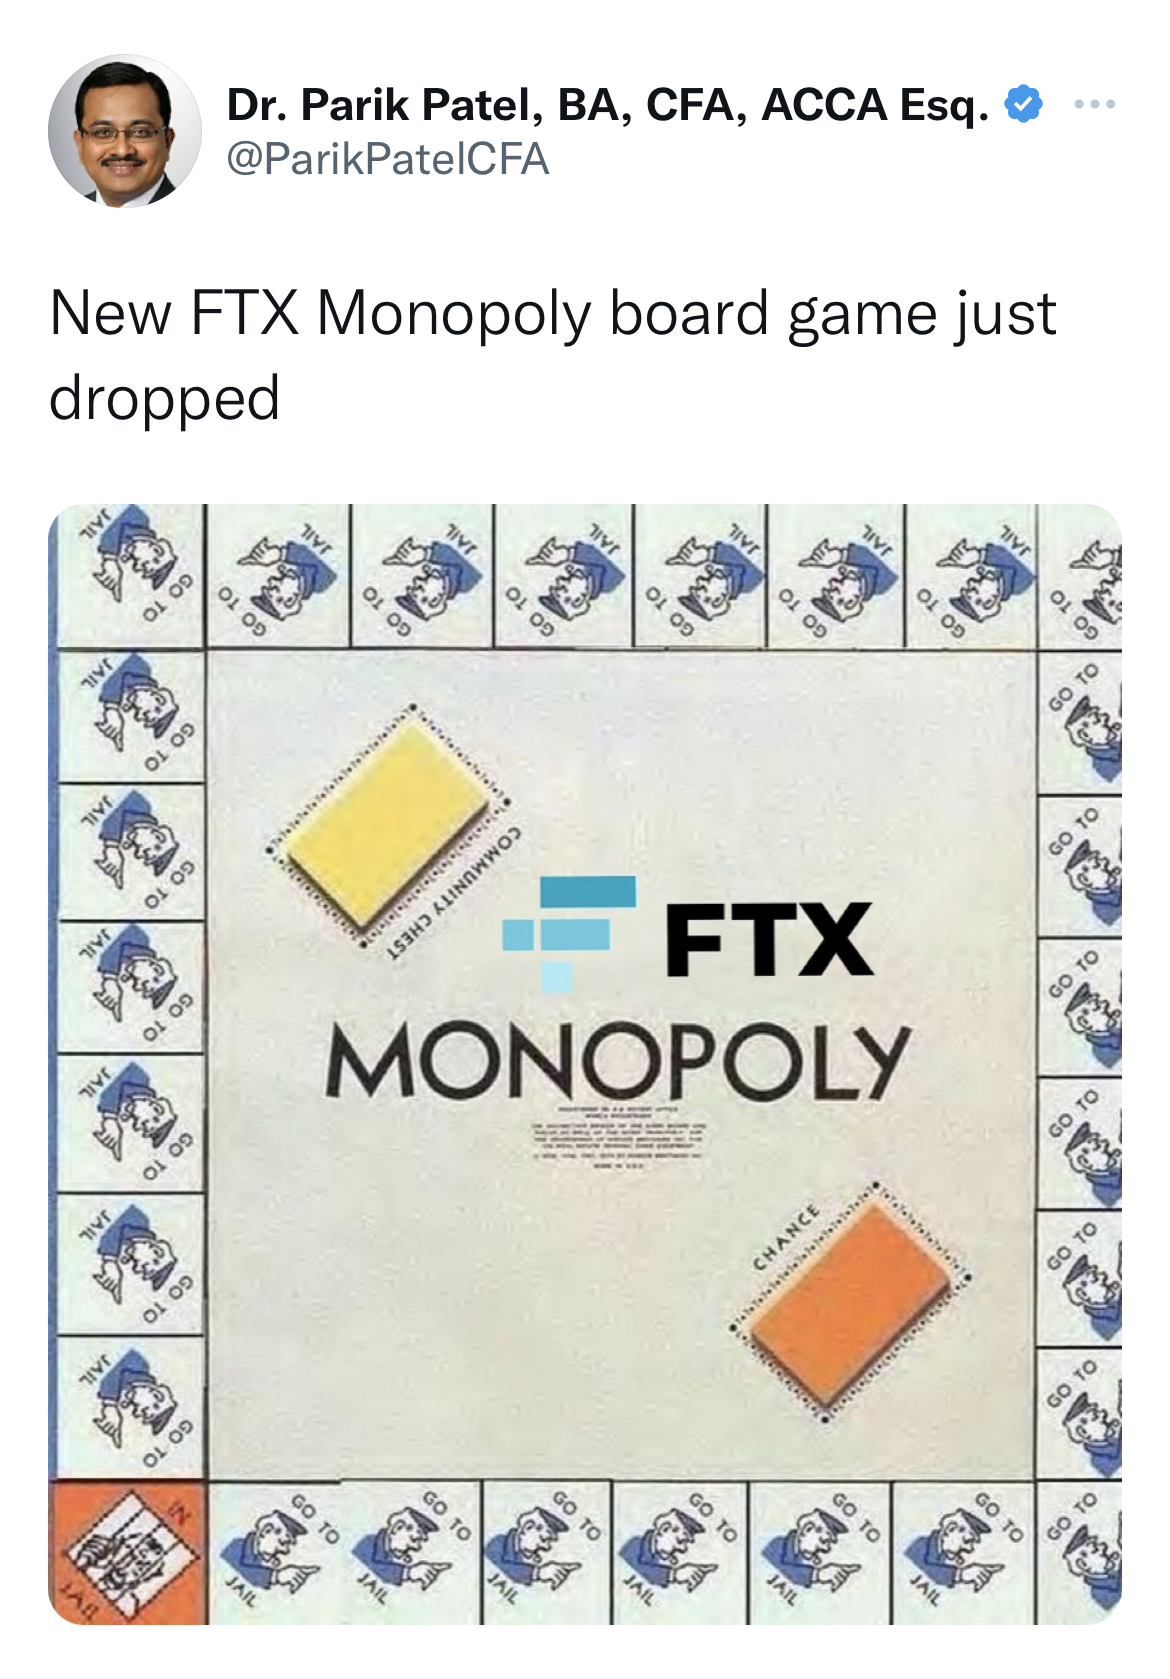 Tweets dunking on celebs - black monopoly board - Dr. Parik Patel, Ba, Cfa, Acca Esq. New Ftx Monopoly board game just dropped 04.09 Go 10 Lunchros Ftx Monopoly 00.10 40 10 Chance 60 10 Go To 00 10 10